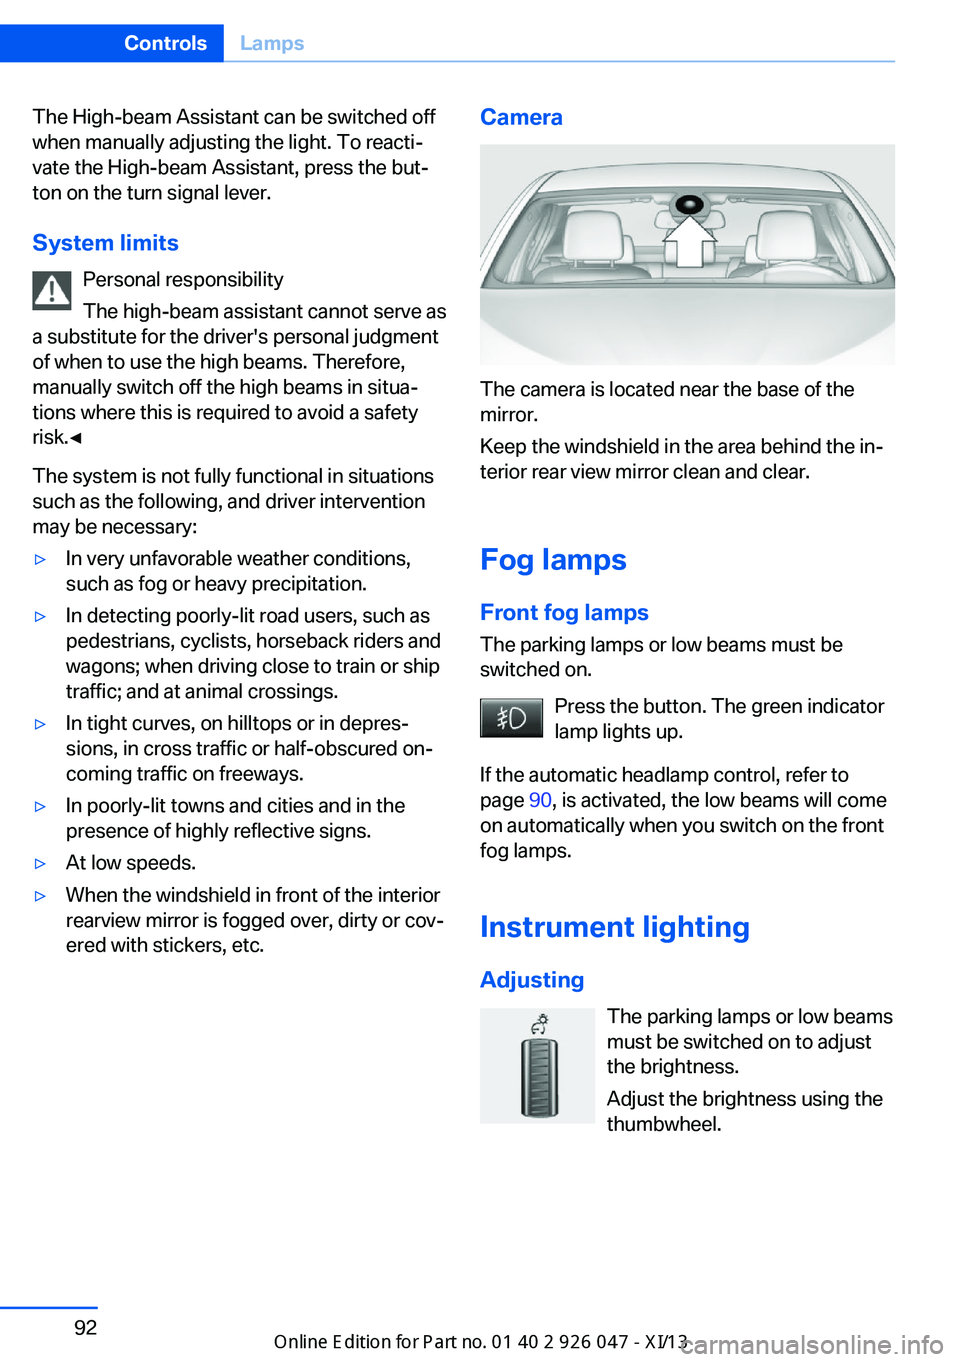 BMW X3 2013 F25 Owners Manual The High-beam Assistant can be switched off
when manually adjusting the light. To reacti‐
vate the High-beam Assistant, press the but‐
ton on the turn signal lever.
System limits Personal responsi